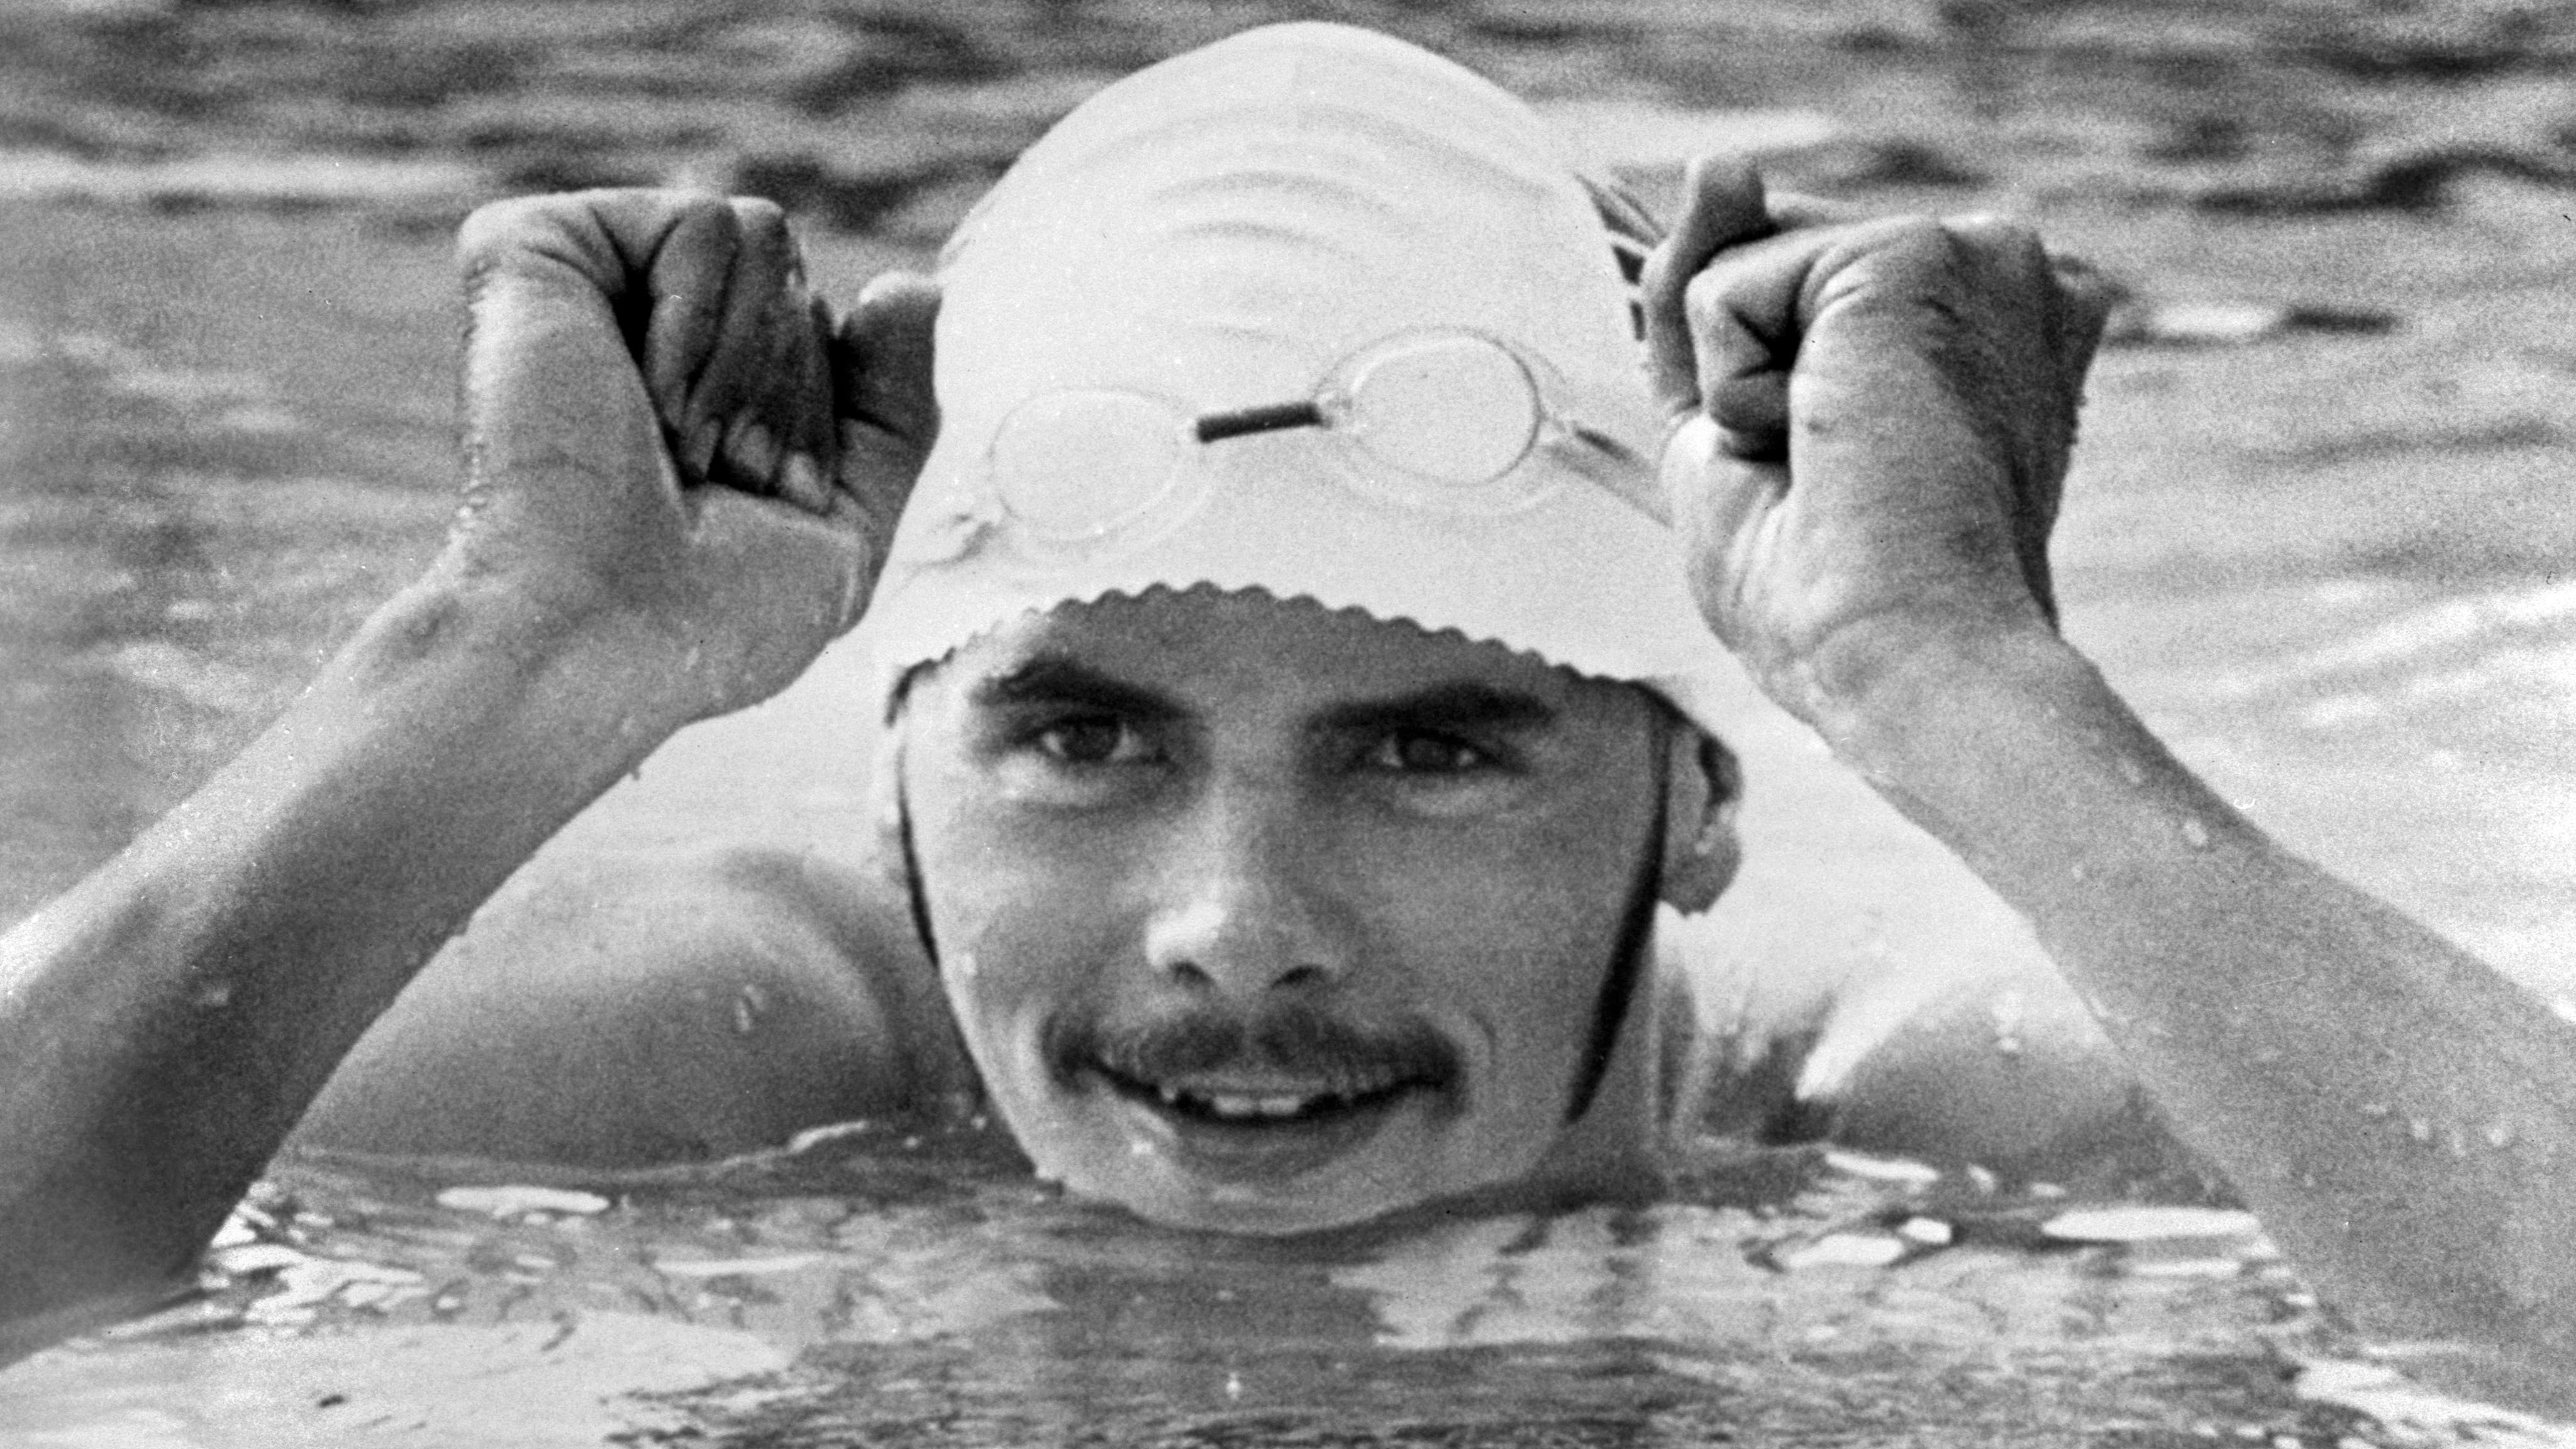 Olympic swimming great David Wilkie dies aged 70 after cancer battle